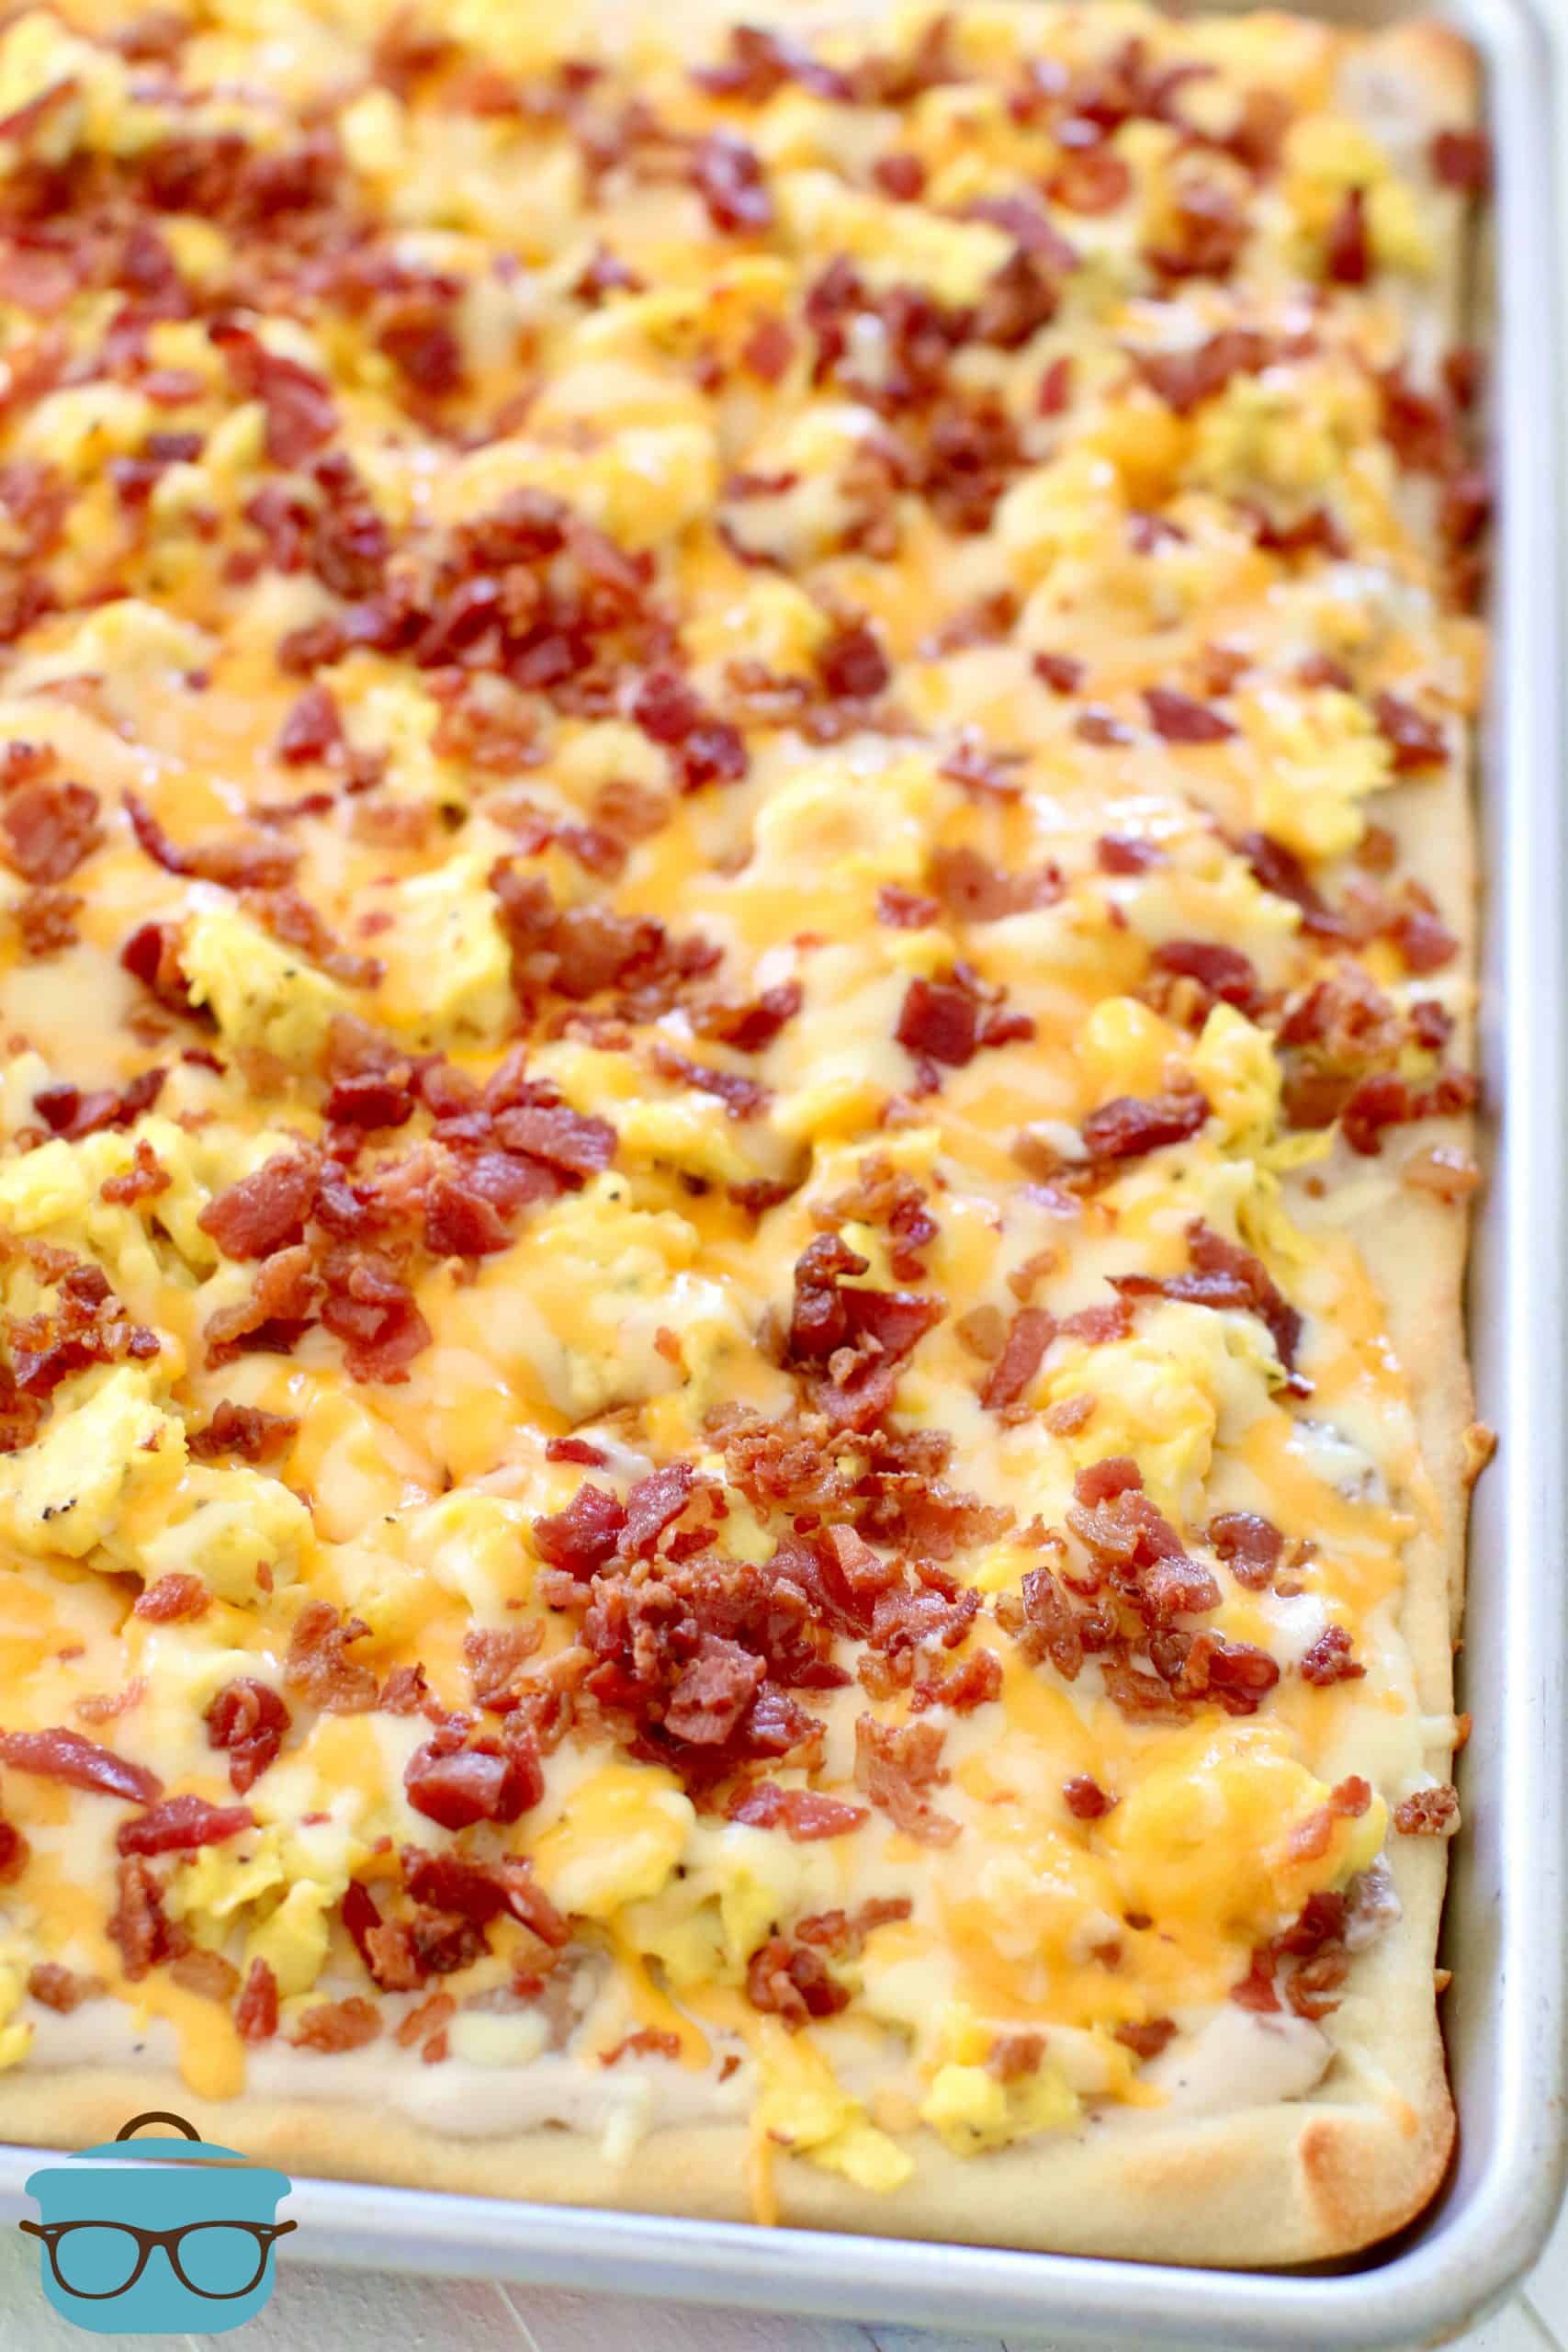 fully cooked breakfast pizza shown in baking pan.